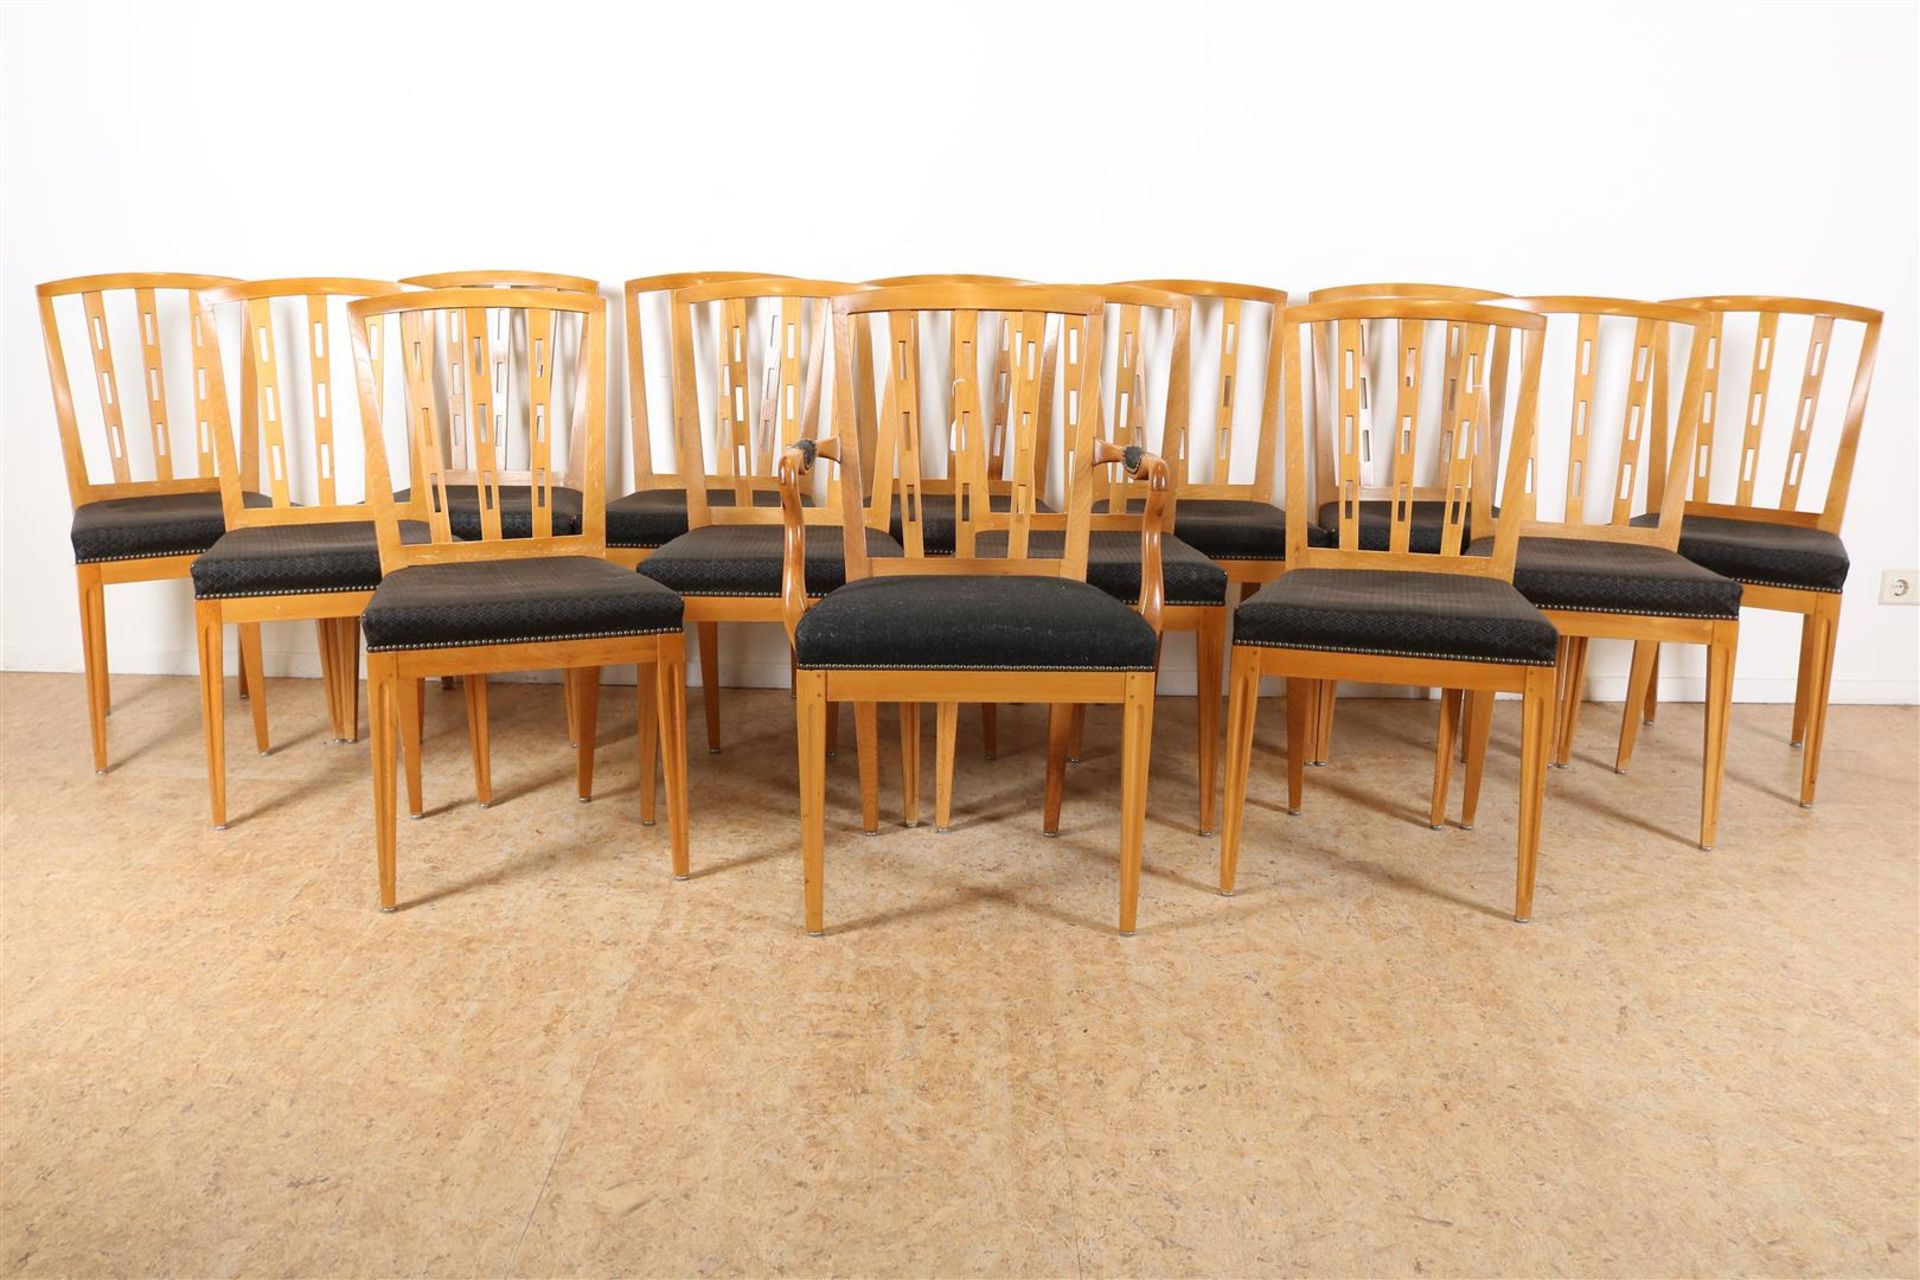 Series of 14 oak chairs with elaborate backrest and green fabric seat, including 1 arm chair.